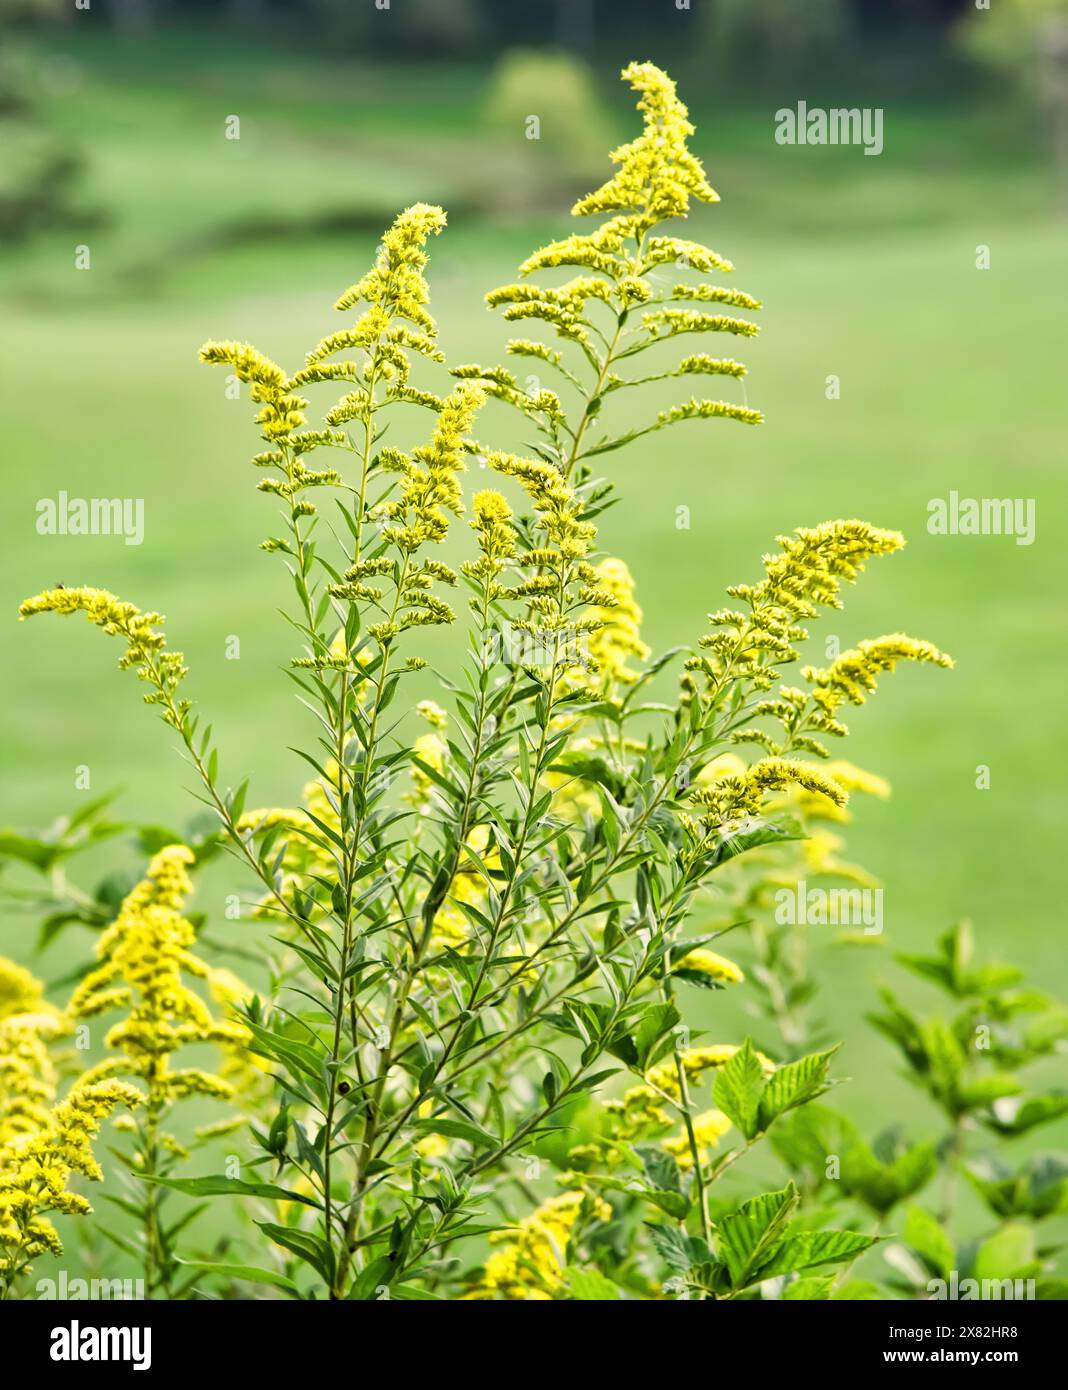 Vibrant yellow Goldenrod perenial plant, also known as Solidago, growing in meadows and field, on a dark background. Stock Photo